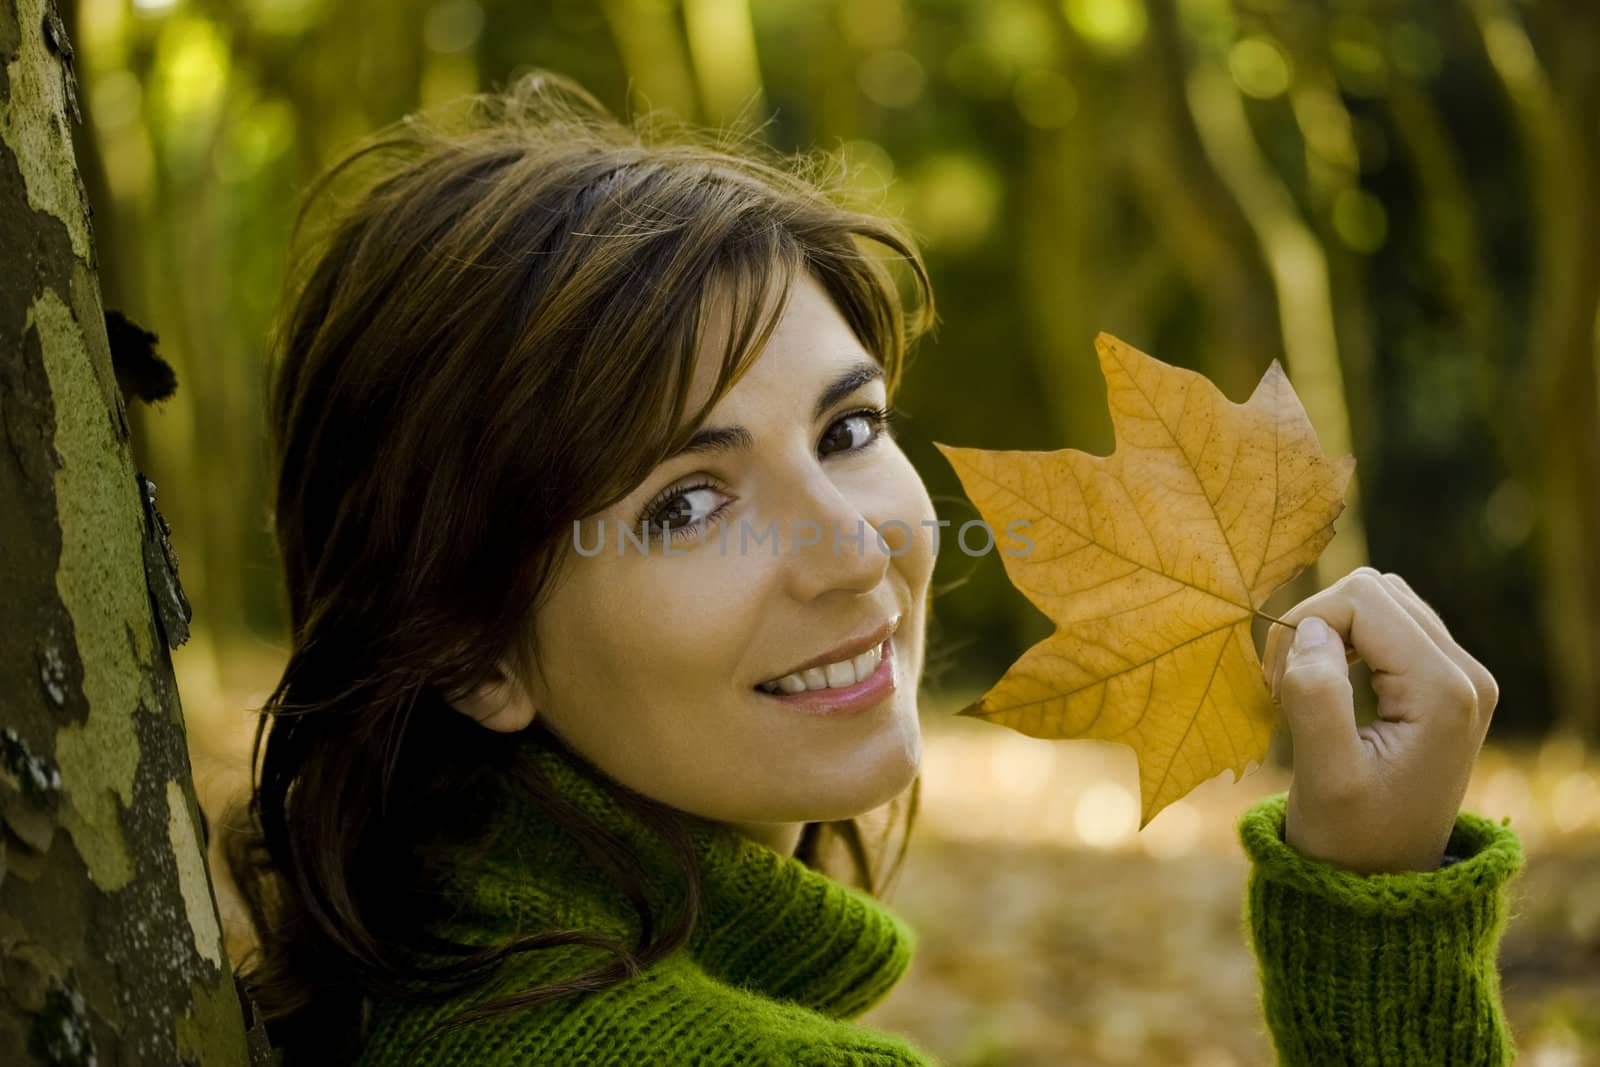 Close-up portrait of a beautiful young woman holding a leaf